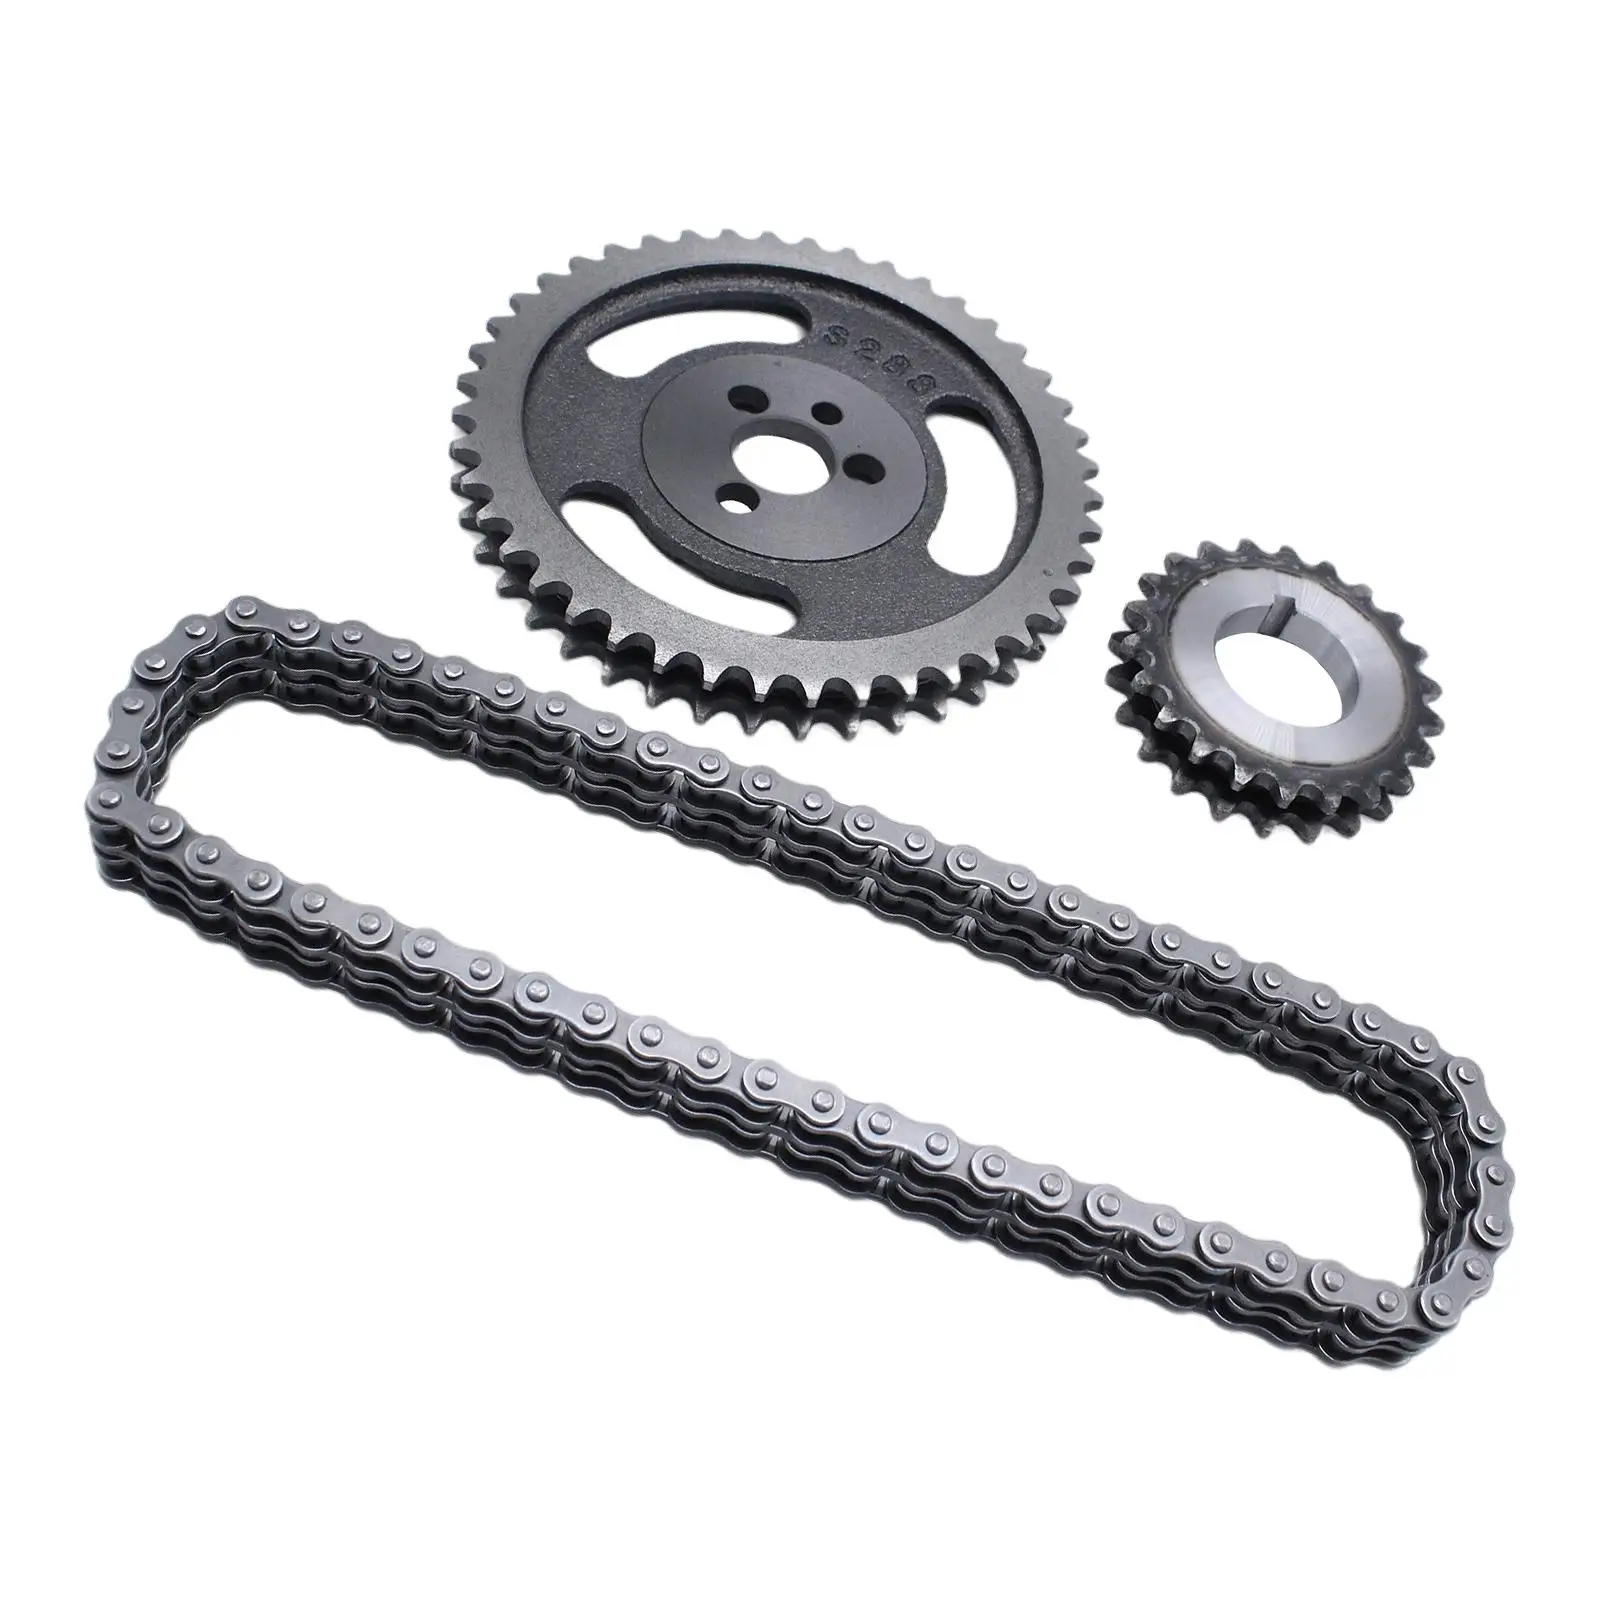 Timing Chain and Gear Set C-3023K C-3023x Side Engine Double Row for Sbc 5.7L 383 350 400 305